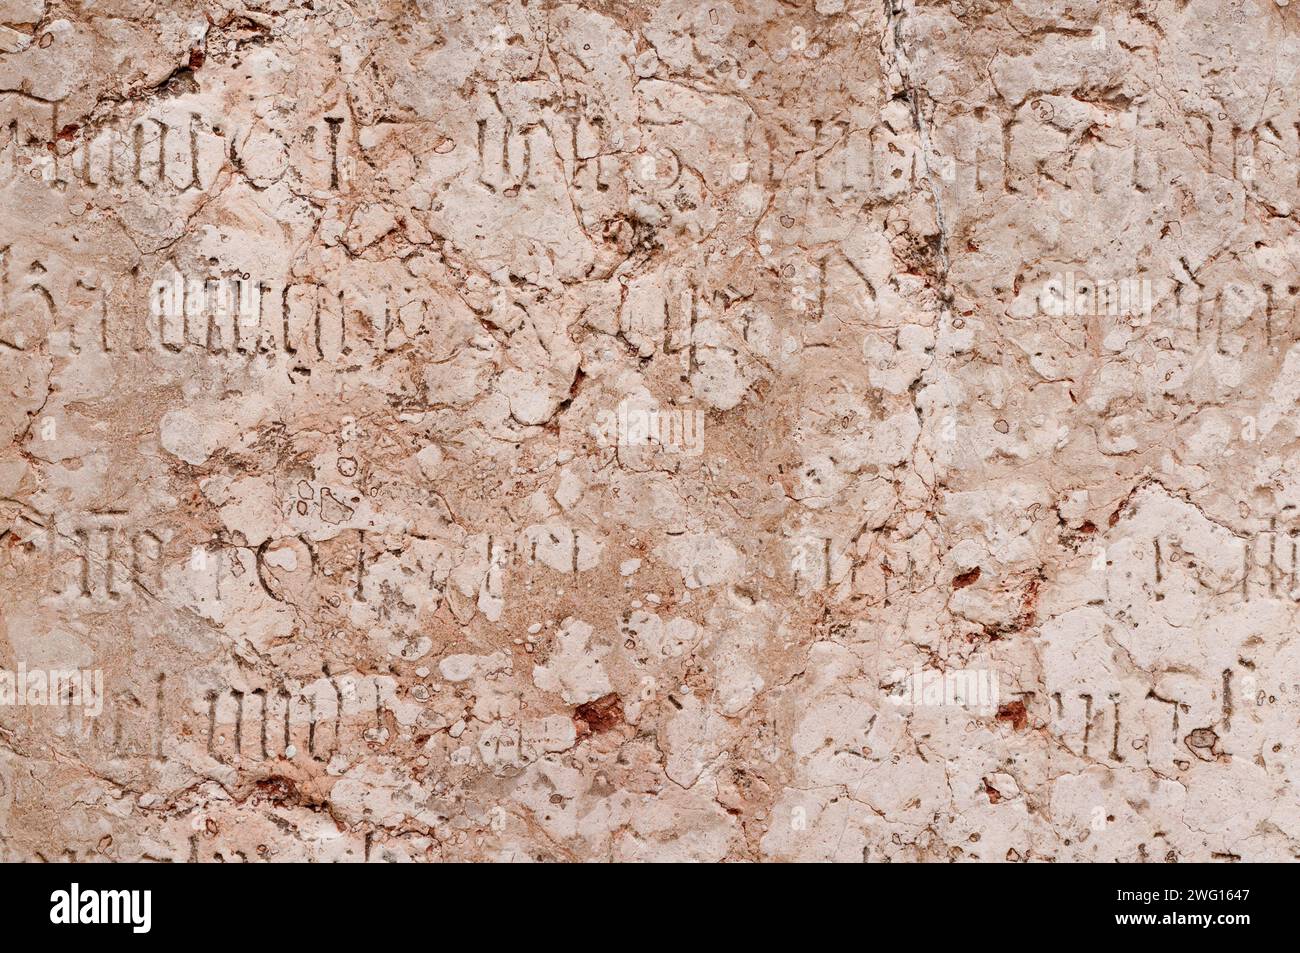 An ancient wall with historic inscriptions etched into it Stock Photo